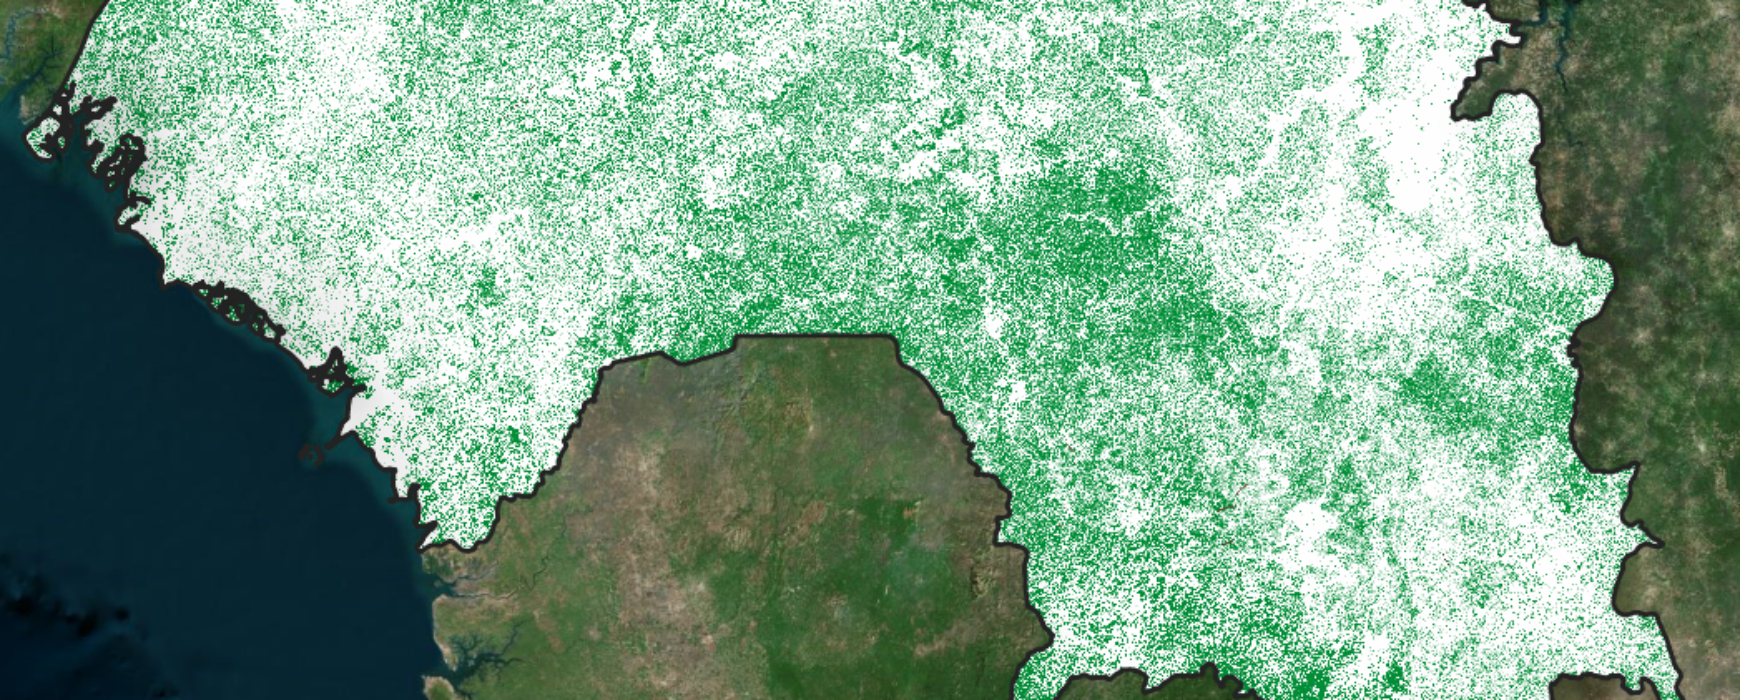 Support for the development of the National Forest and Land Use Monitoring System (SNSF) in the Republic of Guinea